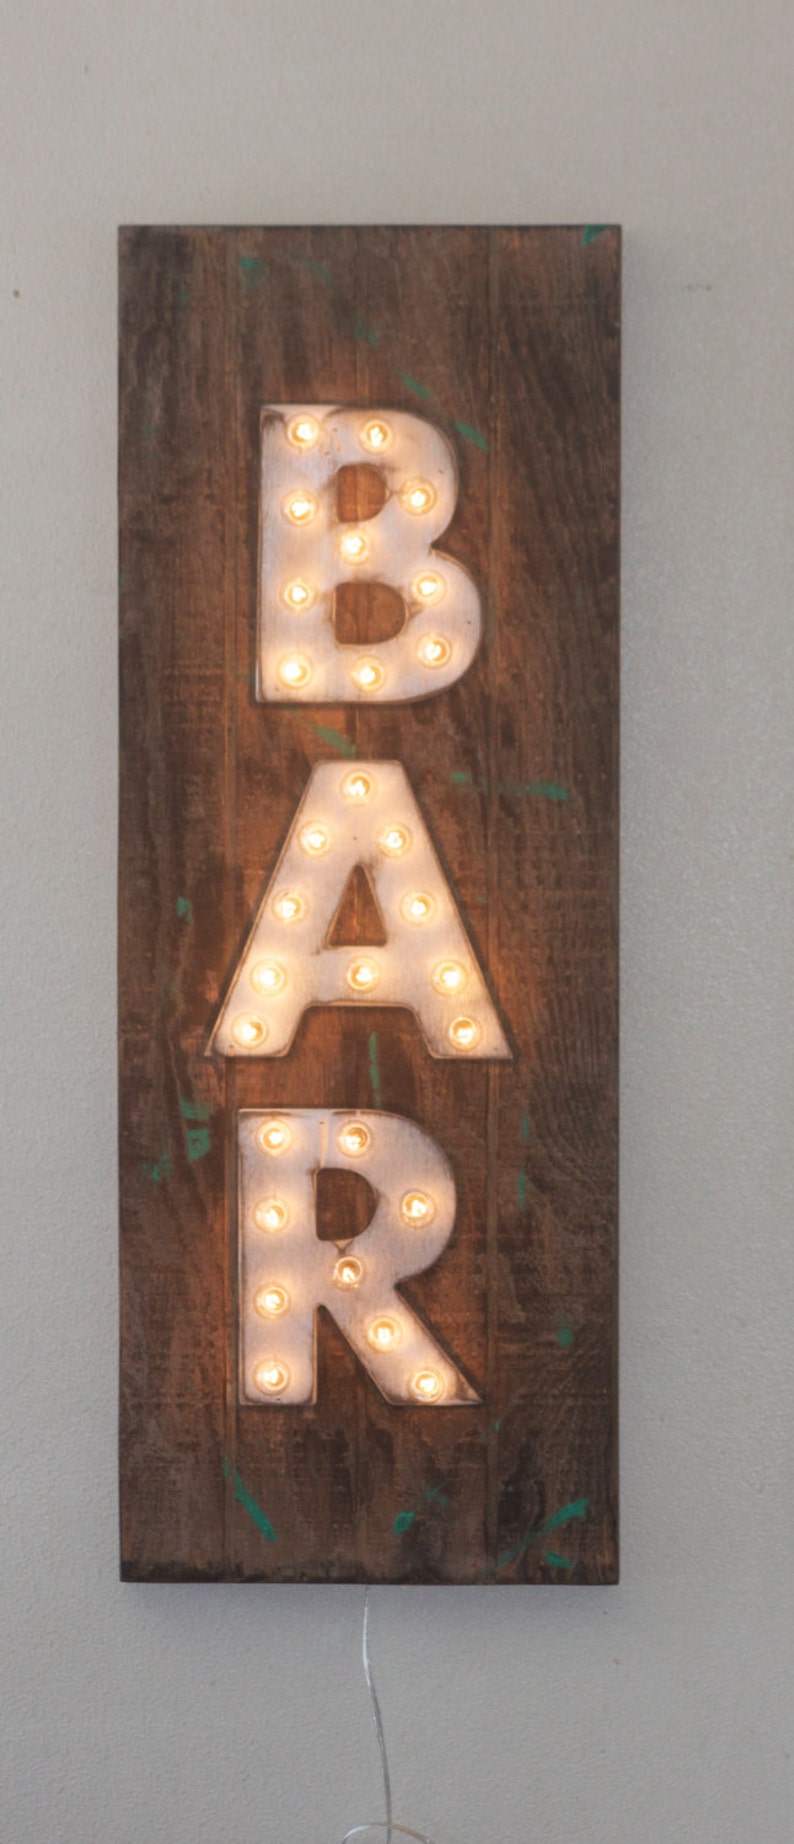 Wood Marquee Sign Lighted Sign Lighted Letters Bar Photos Dream Love Open Business PLAY Game On image 8